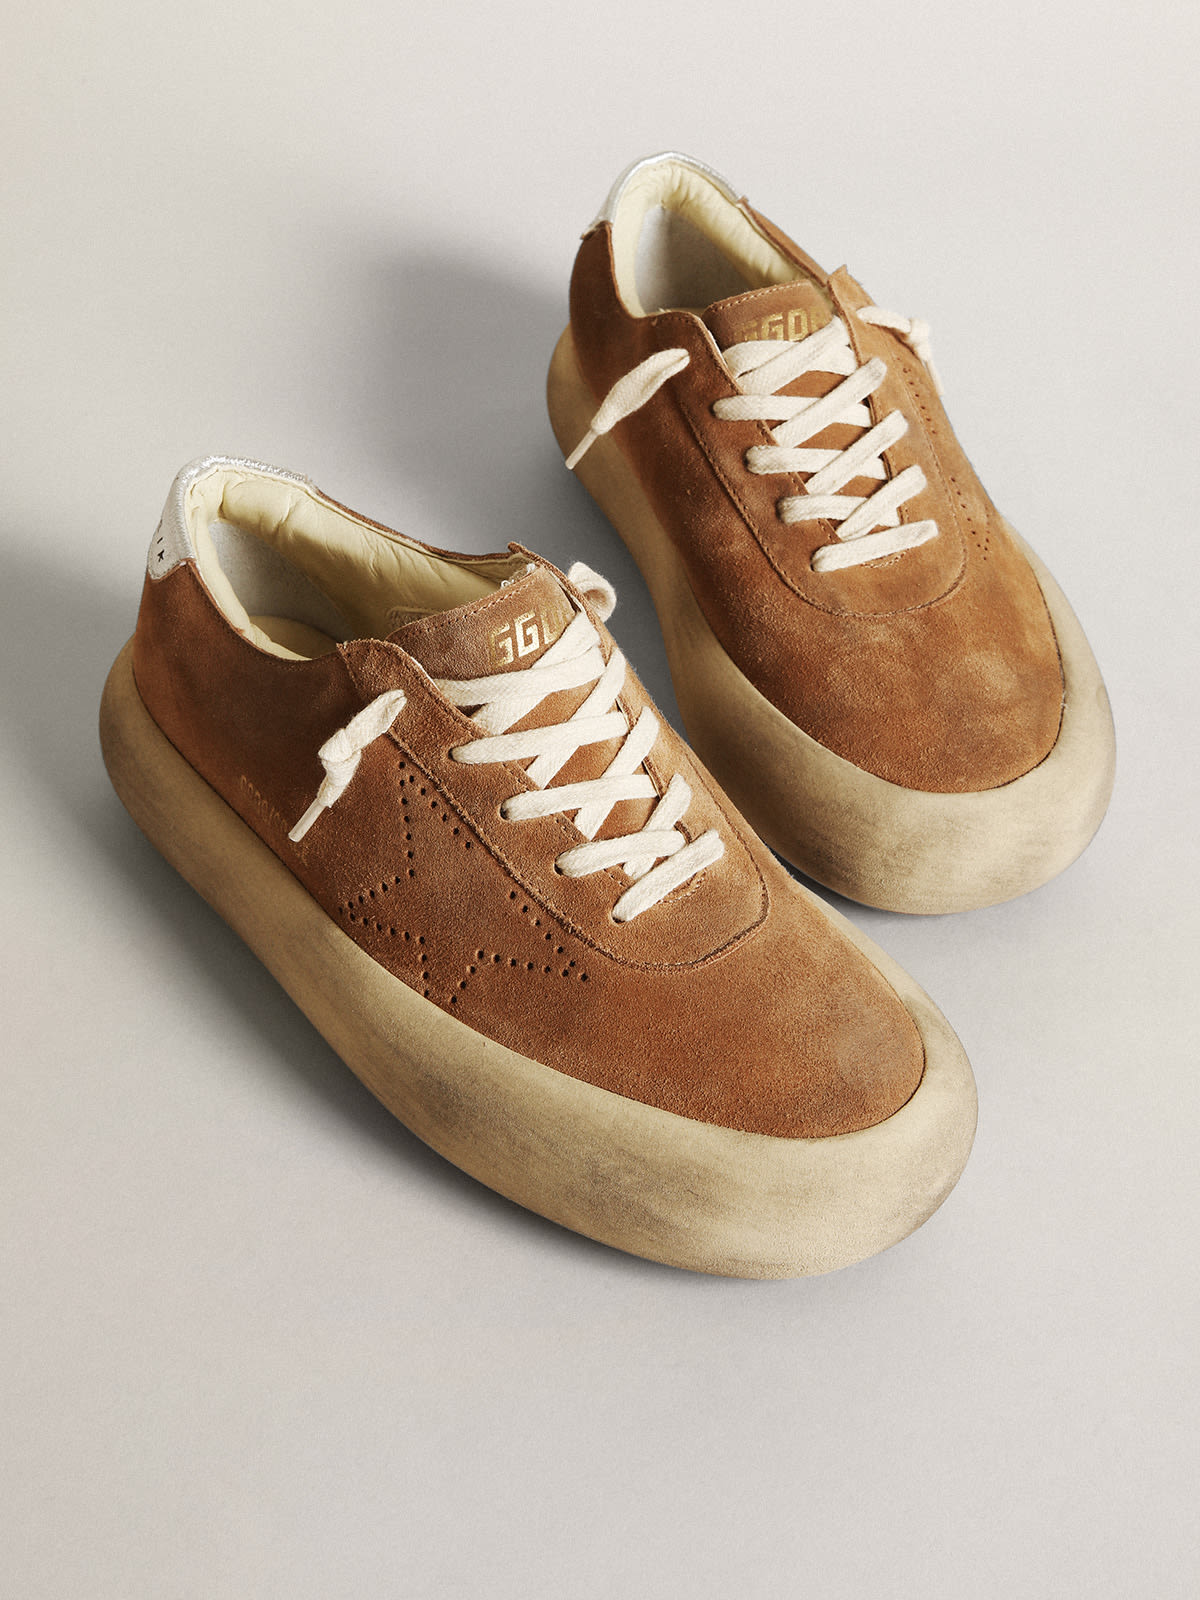 Golden Goose - Women's Space-Star in tobacco-colored suede with perforated star in 